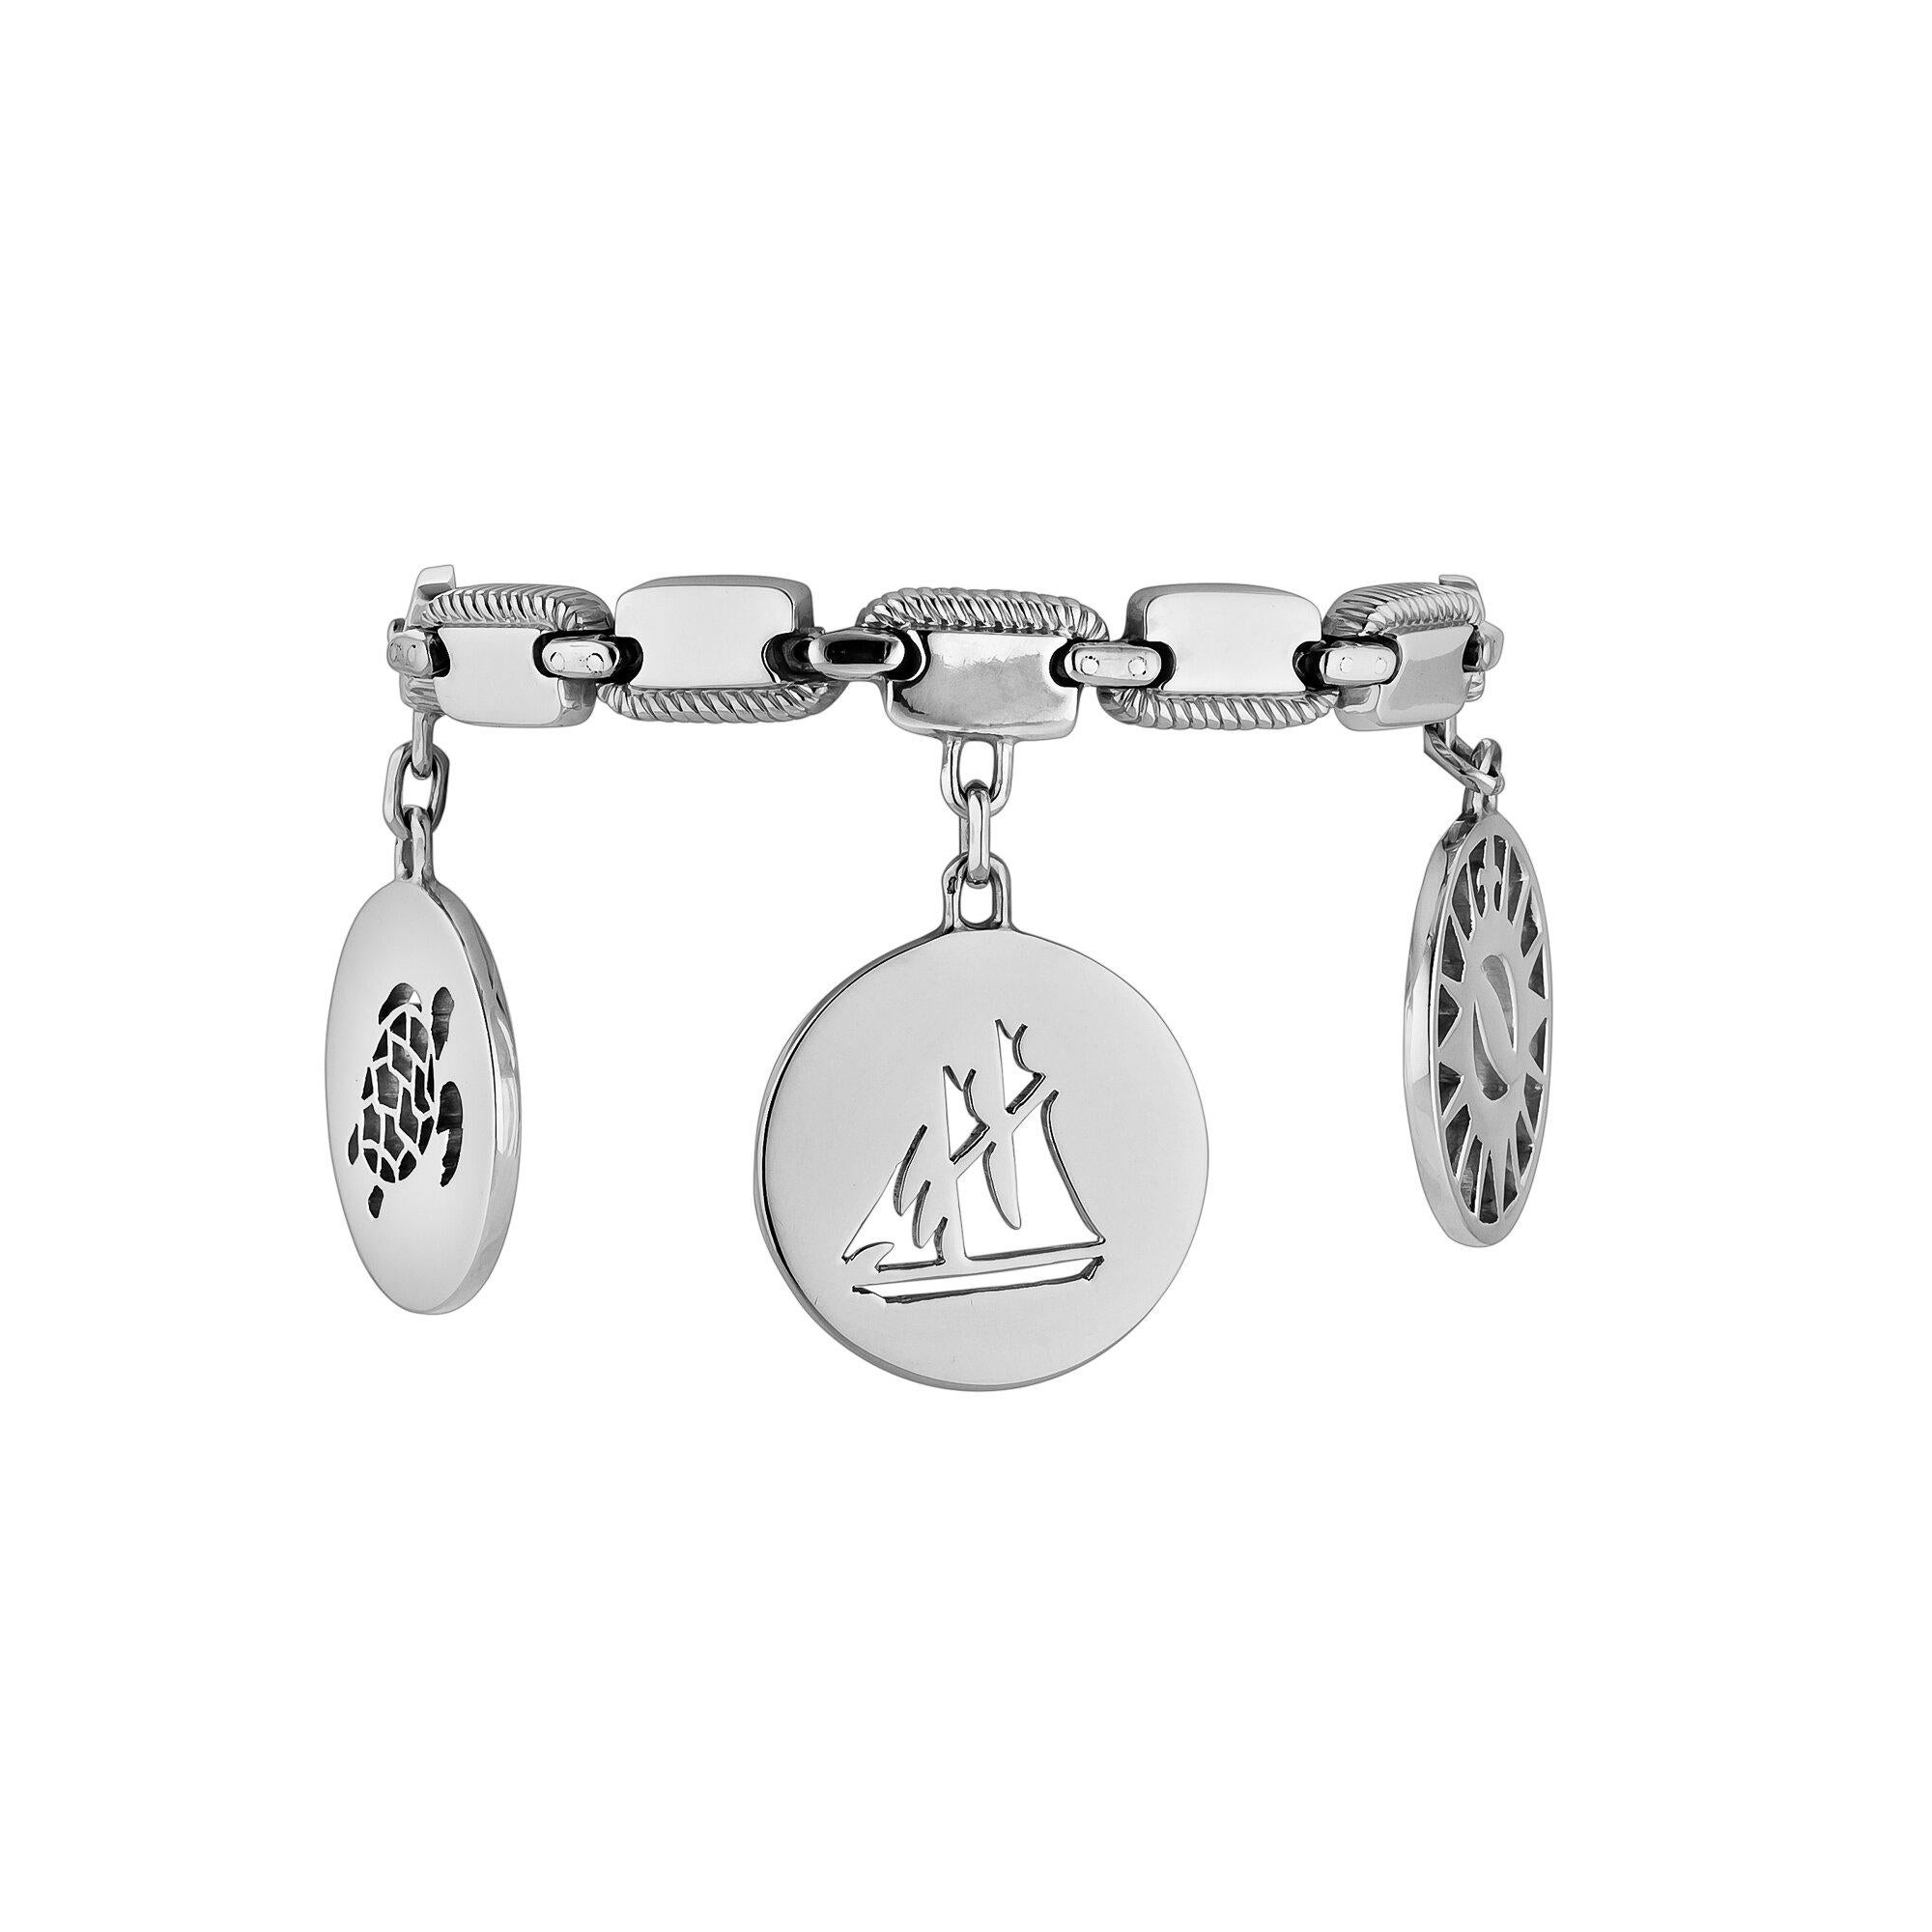 Hermes Paris Vintage Sterling Silver Nautical Charm Bracelet In Excellent Condition For Sale In Greenwich, CT